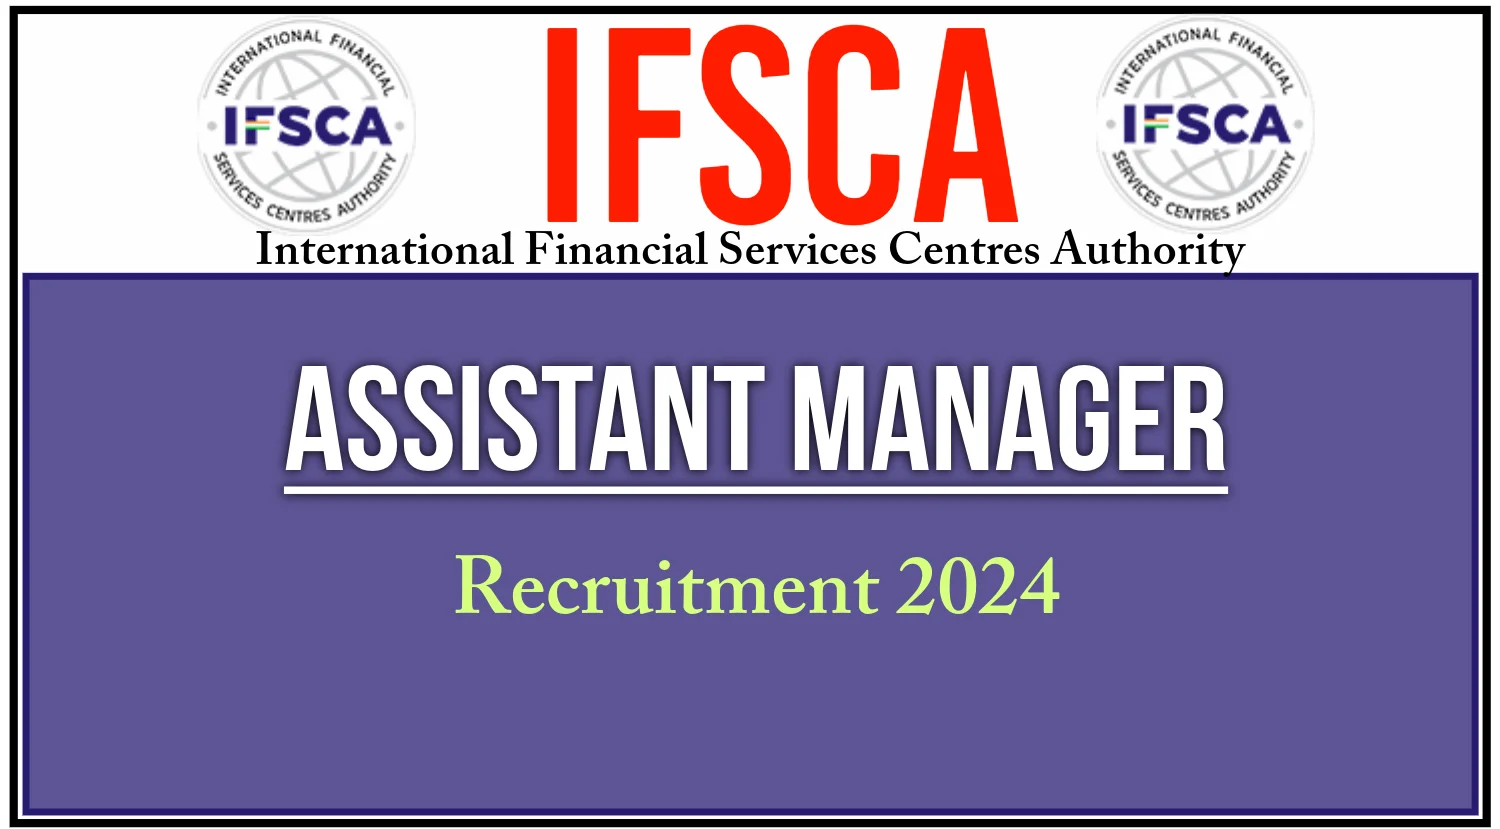 IFSCA Assistant Manager Recruitment